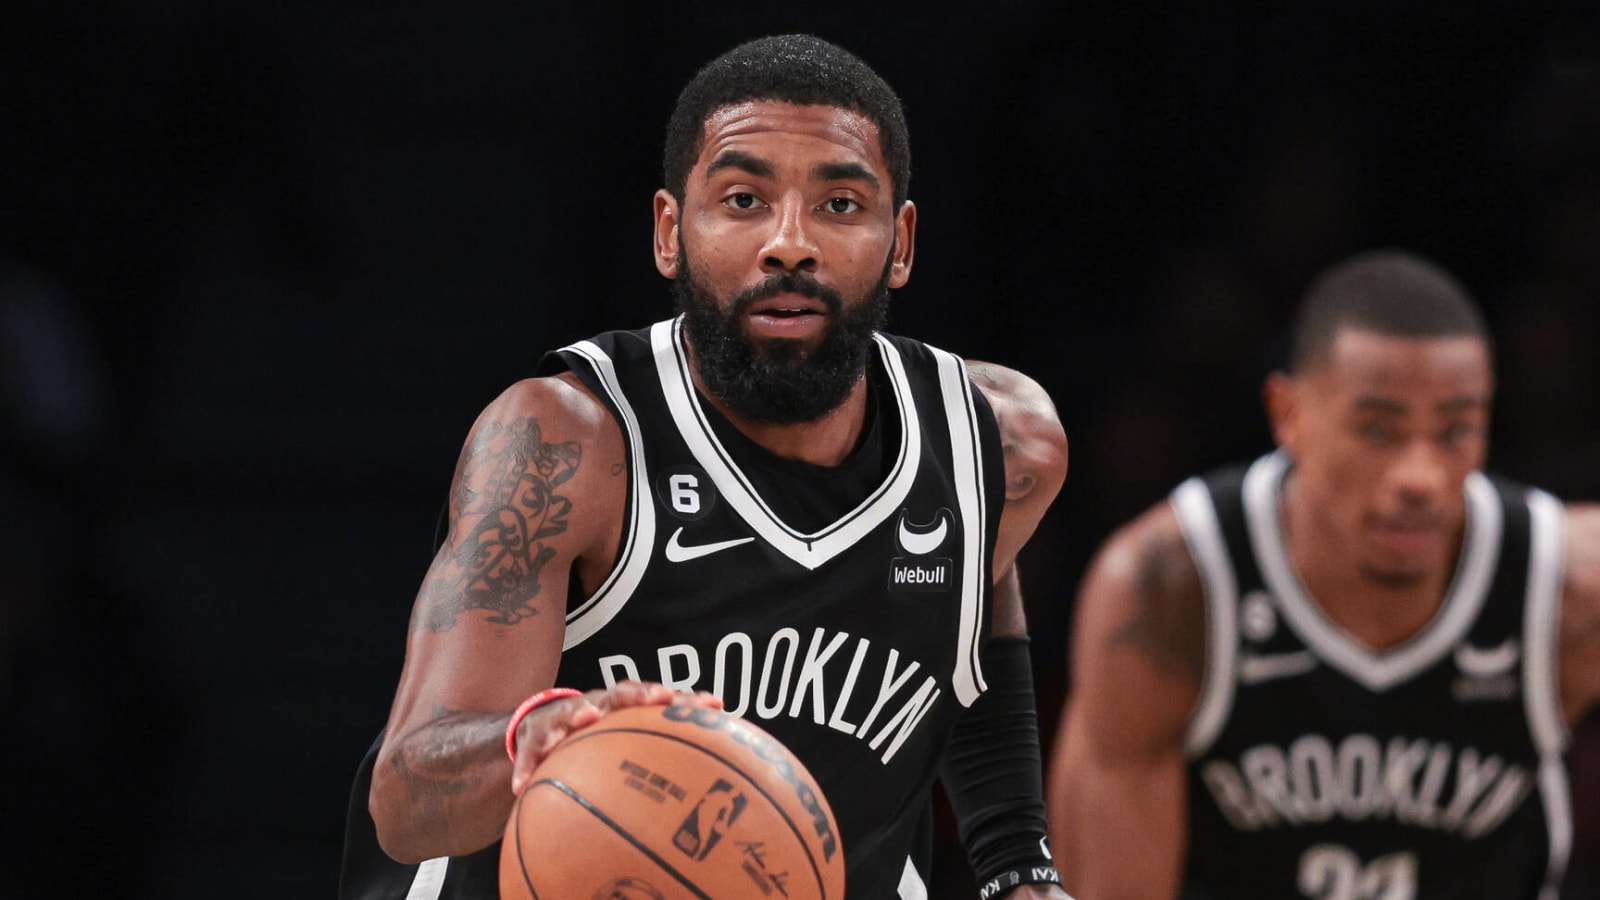 NBPA, Adam Silver, Nets comment on Kyrie Irving's status